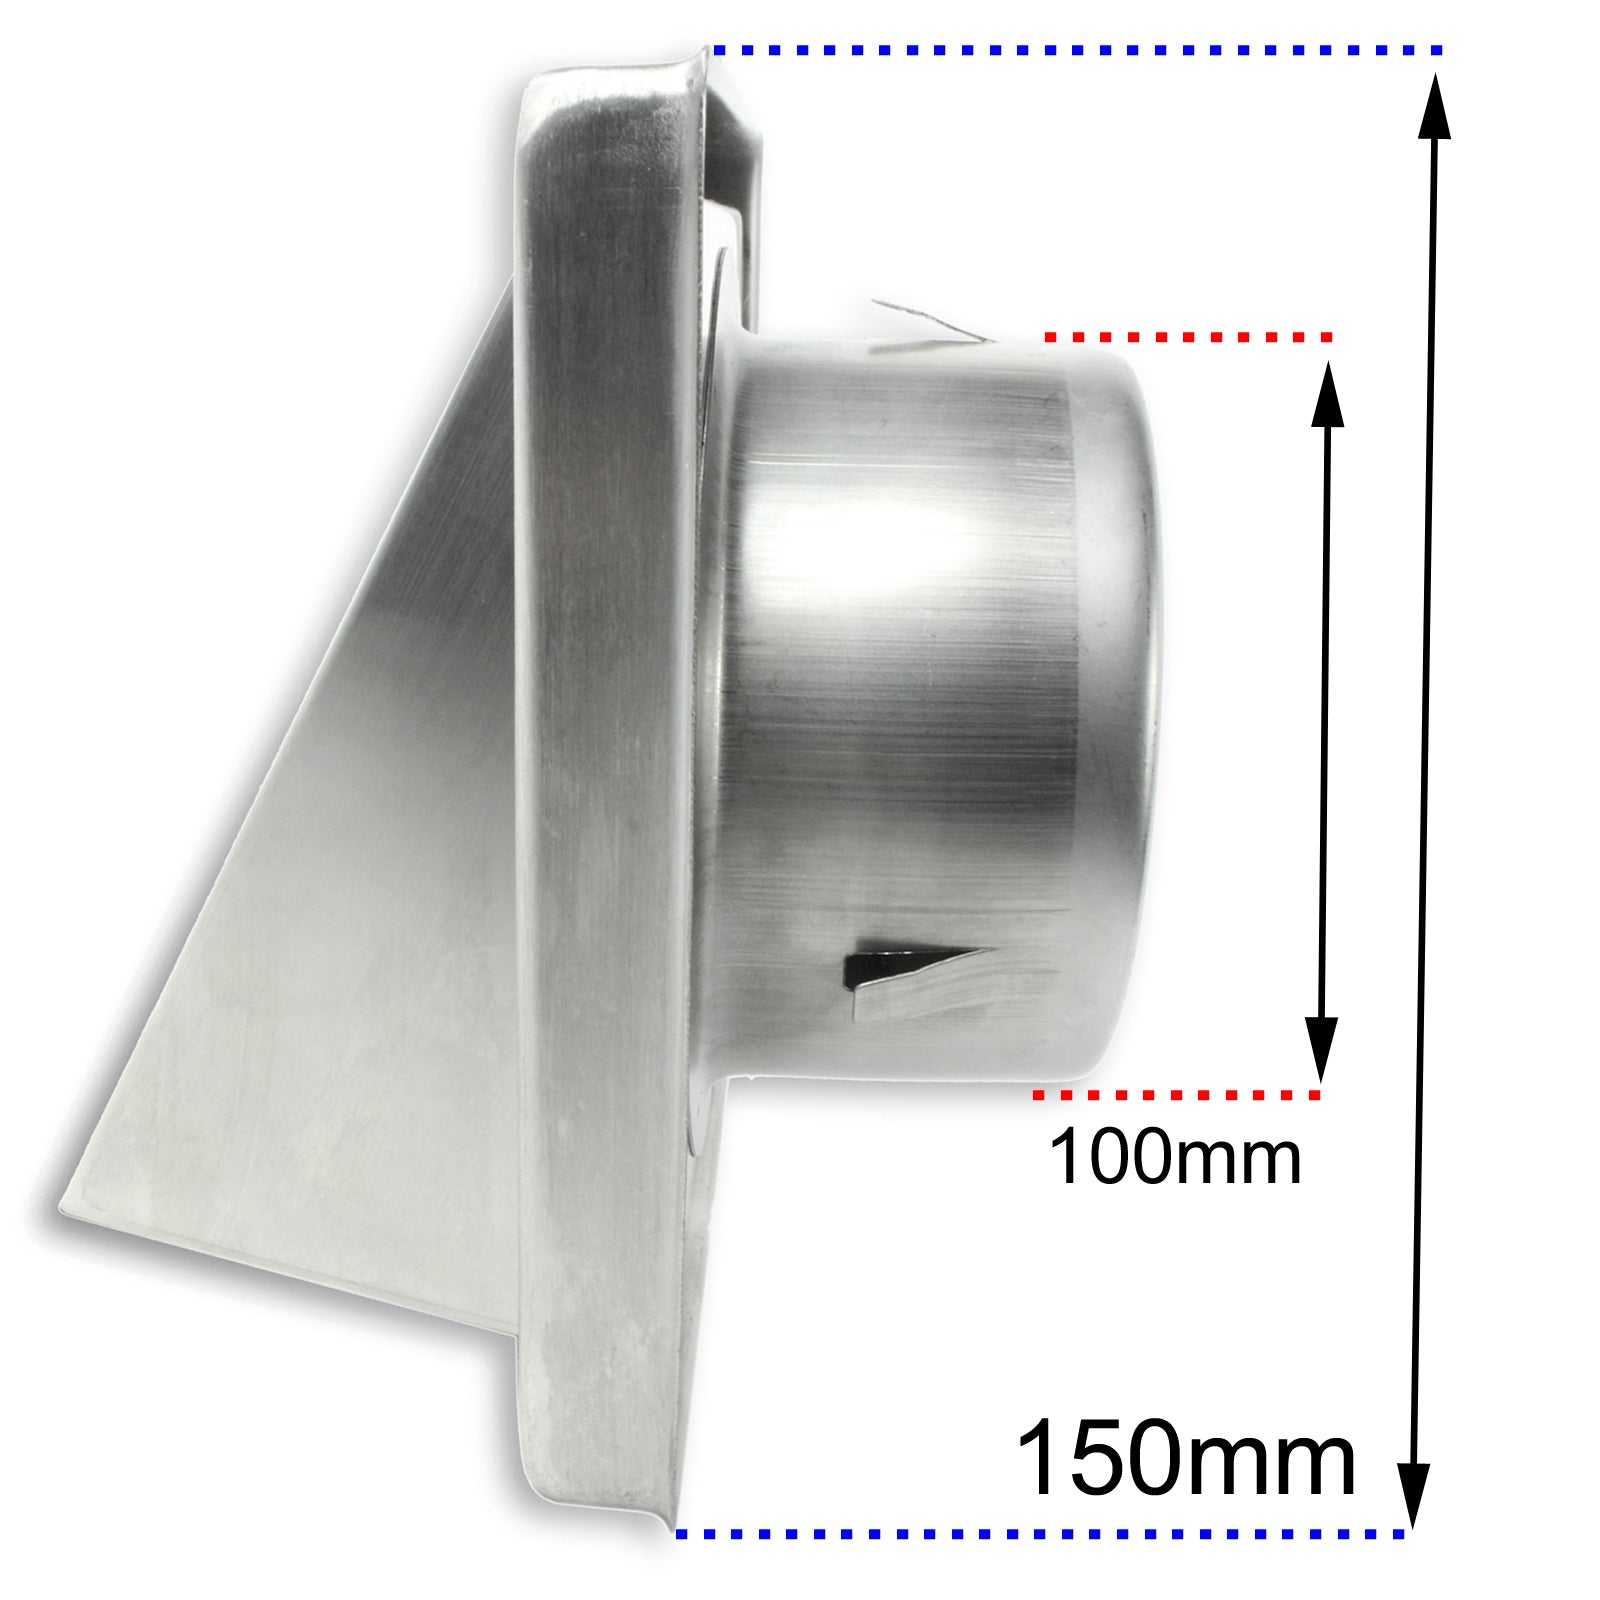 Stainless Steel Cowled Wall Extractor Vent + Hose (100mm, 4")